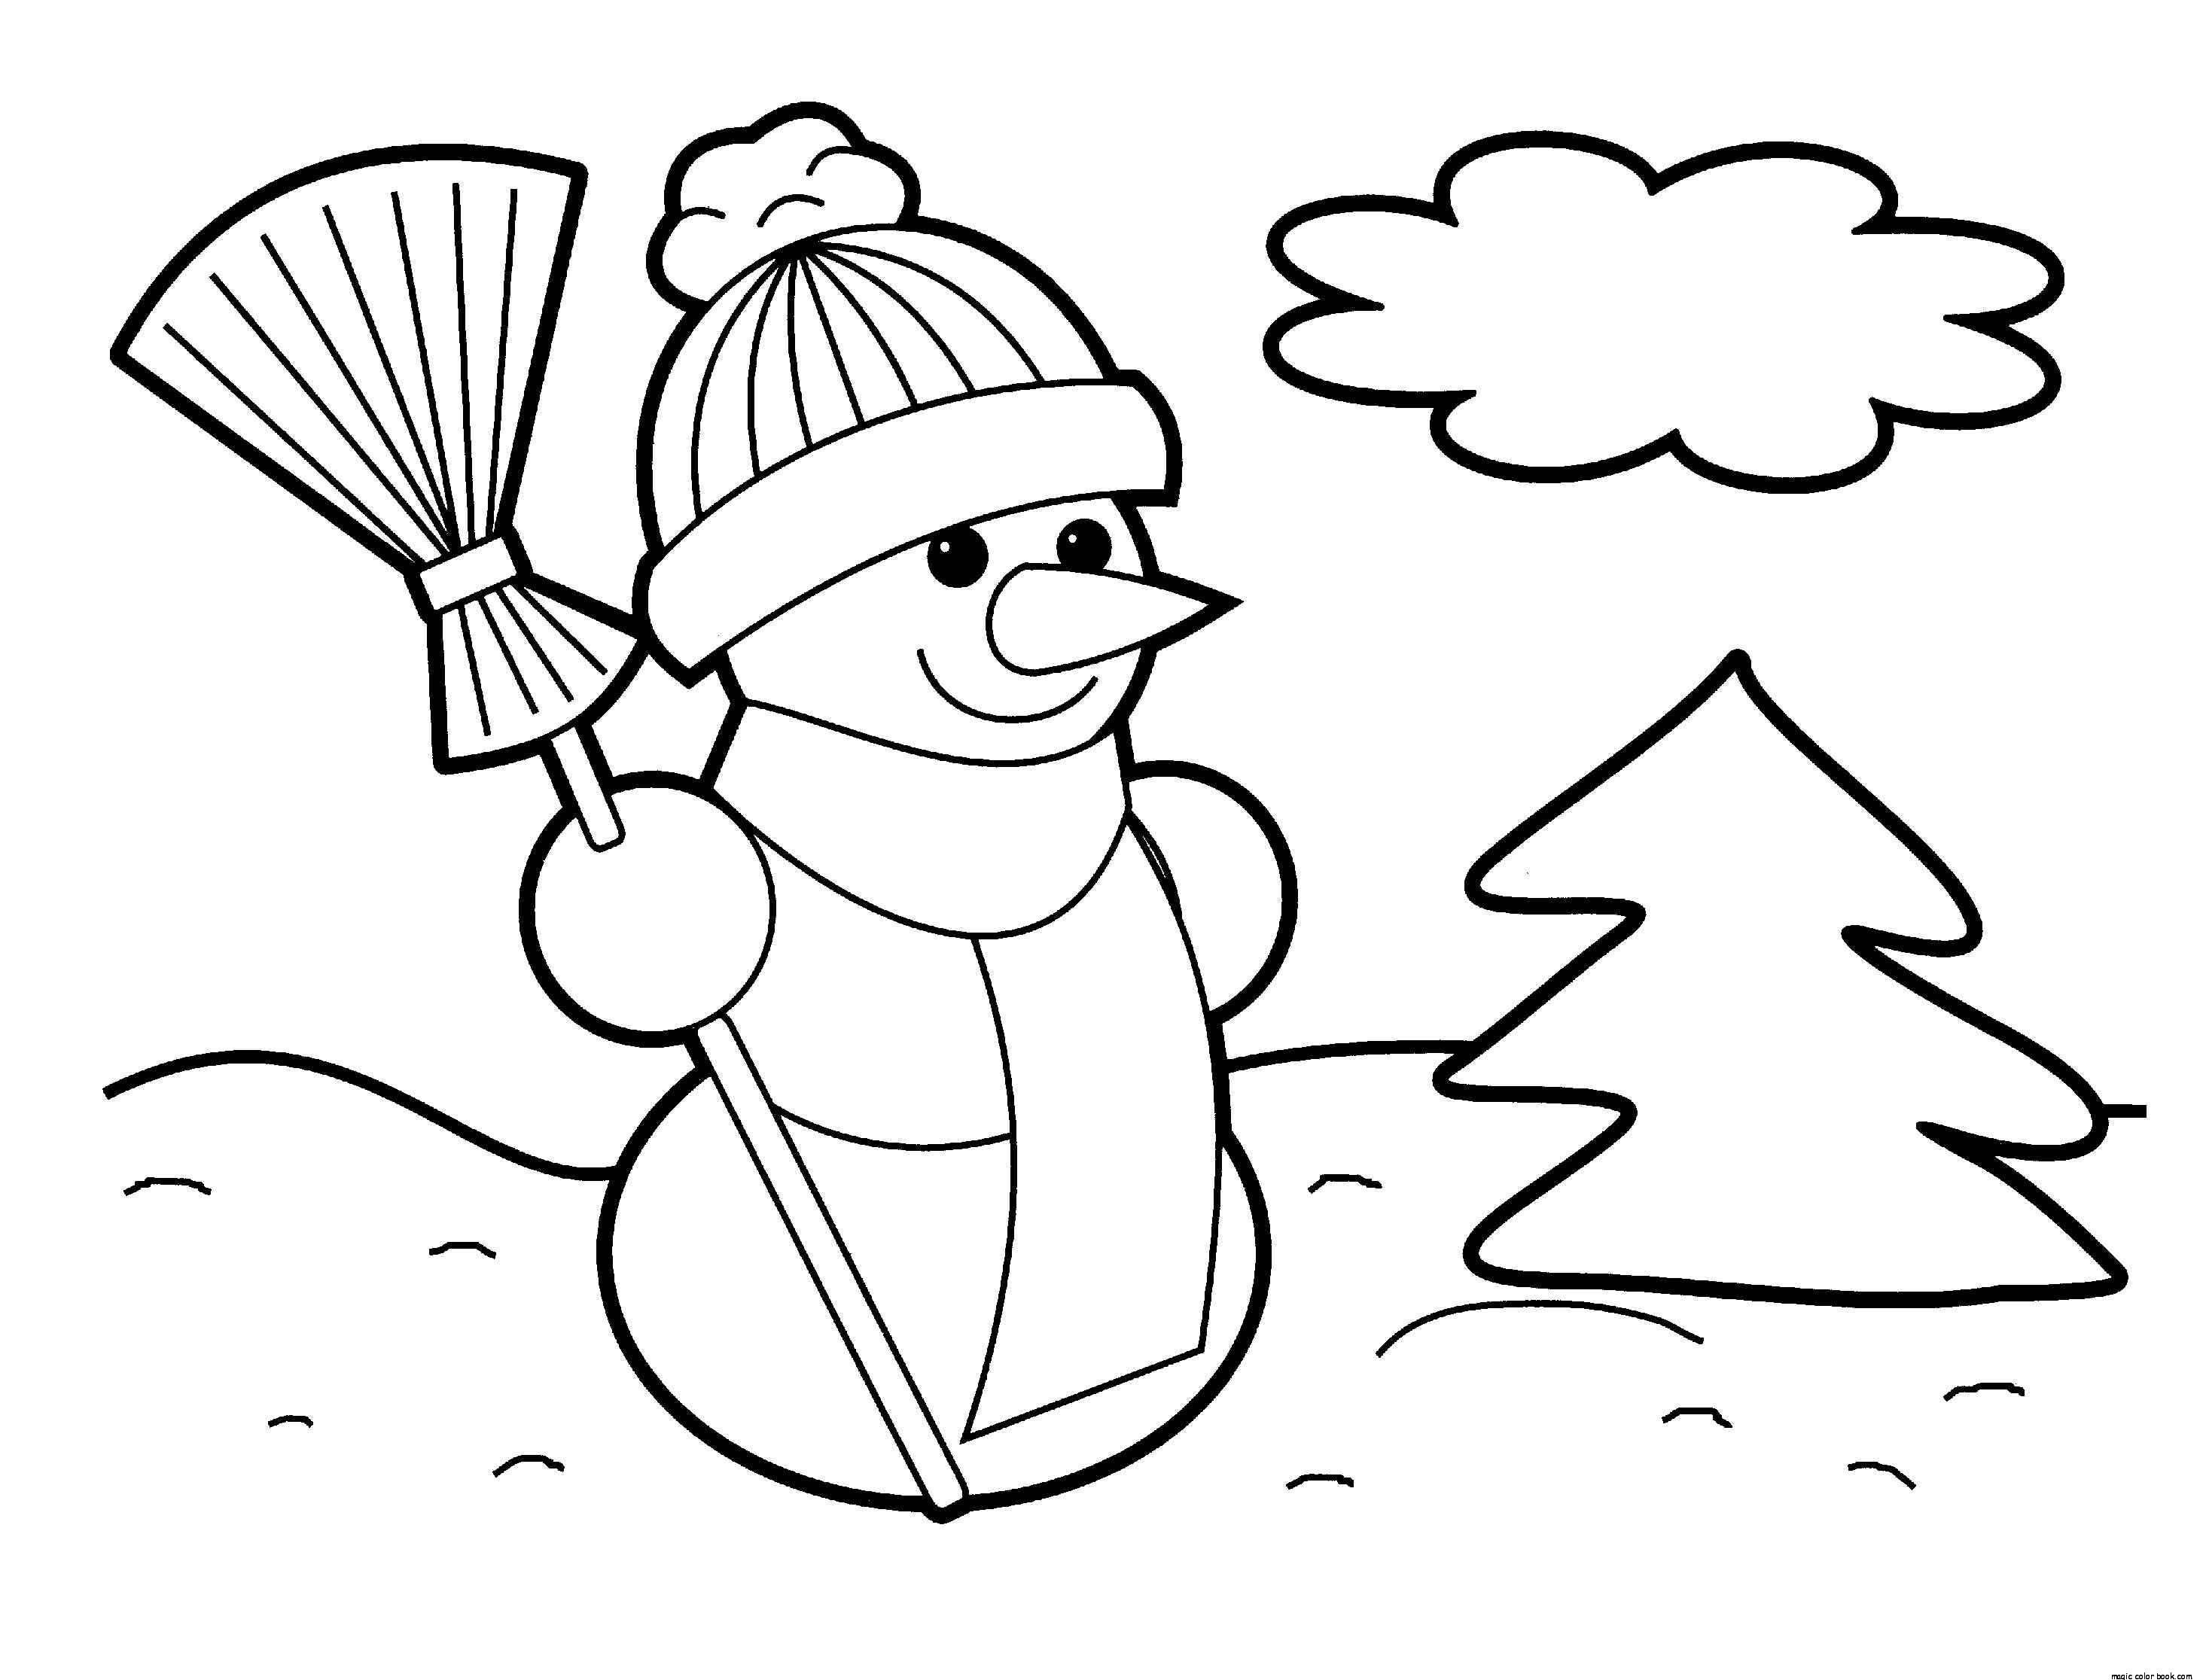 All Snowman Coloring Pages - Ð¡oloring Pages For All Ages